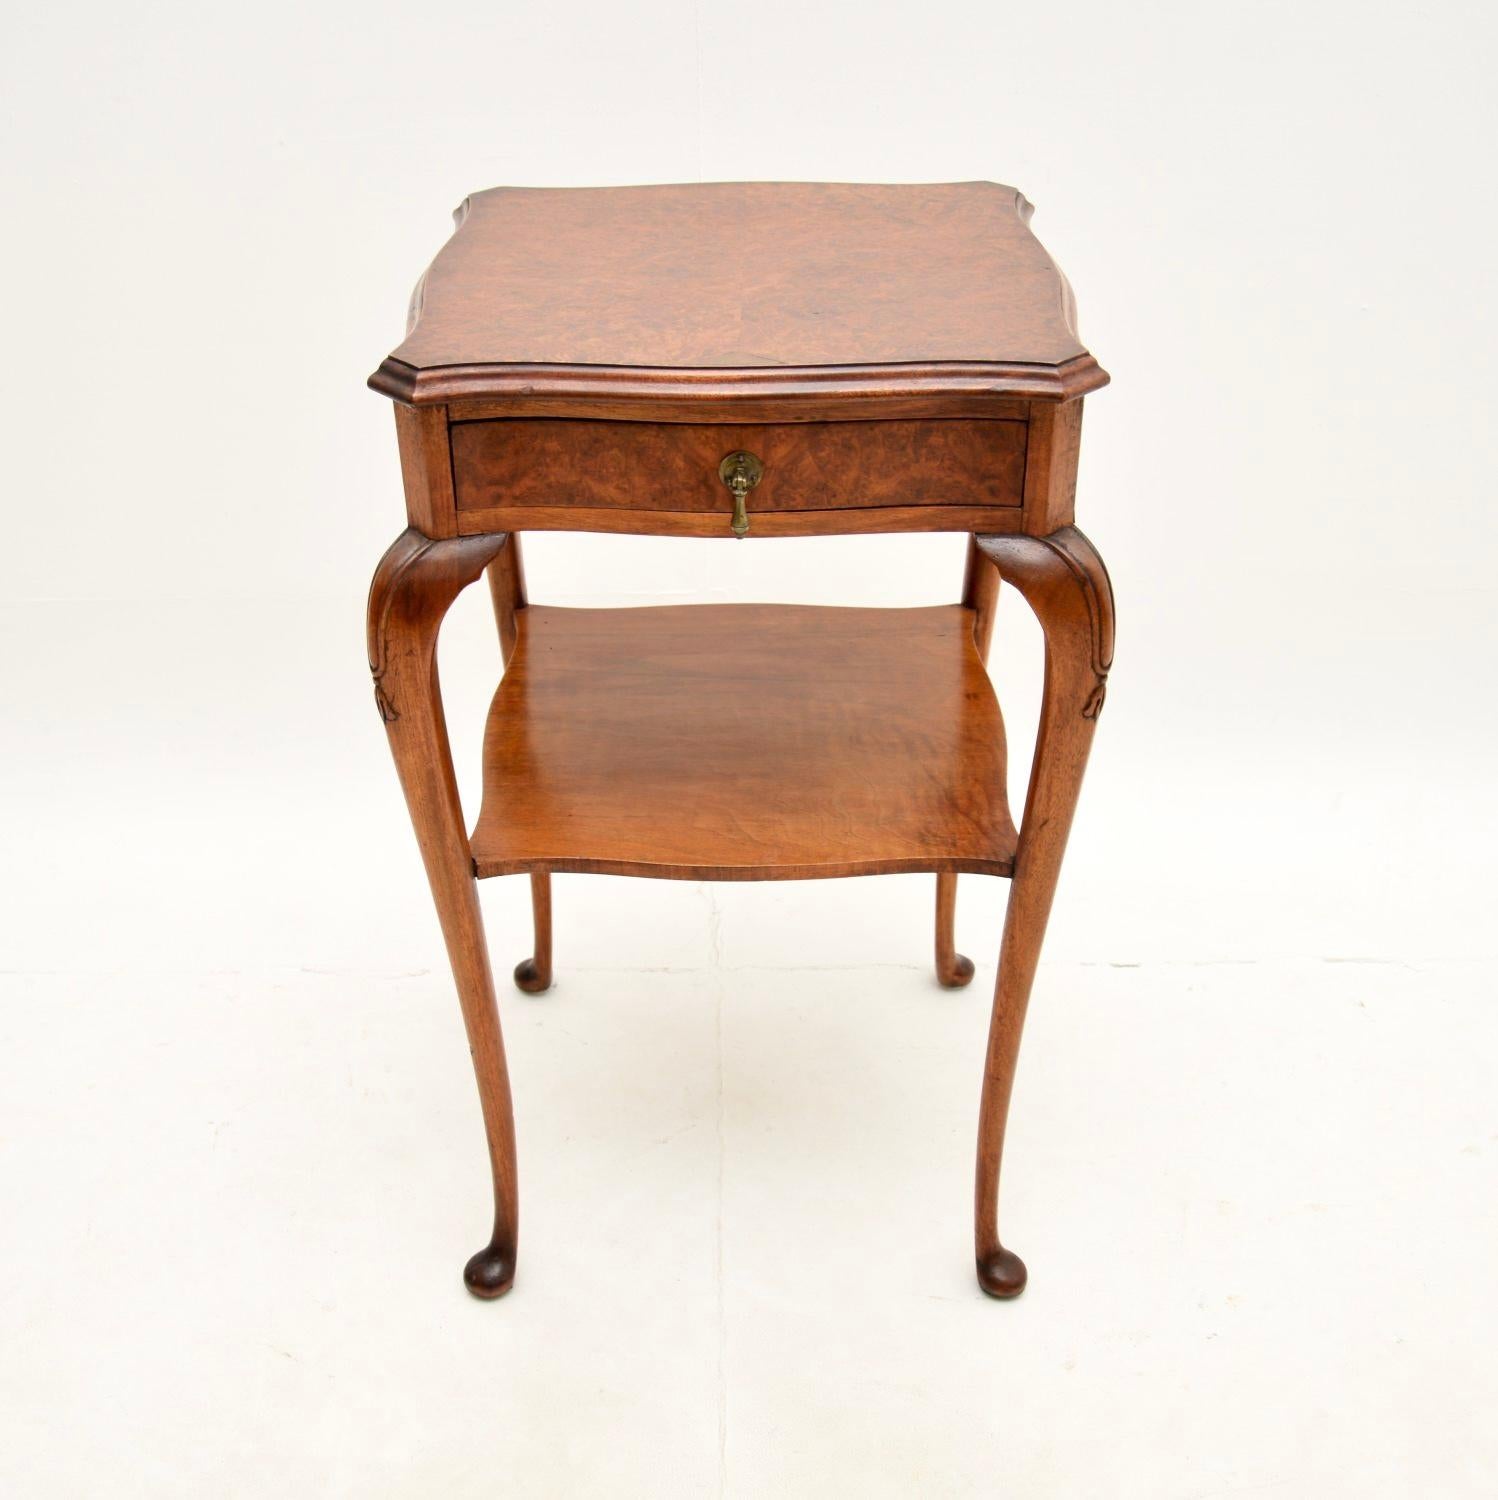 A lovely antique burr walnut two tier side table, made in England and dating from around the 1900-1920 period.

It is is of superb quality and is a very useful size to be used as an occasional side / lamp table around the home. It has beautifully